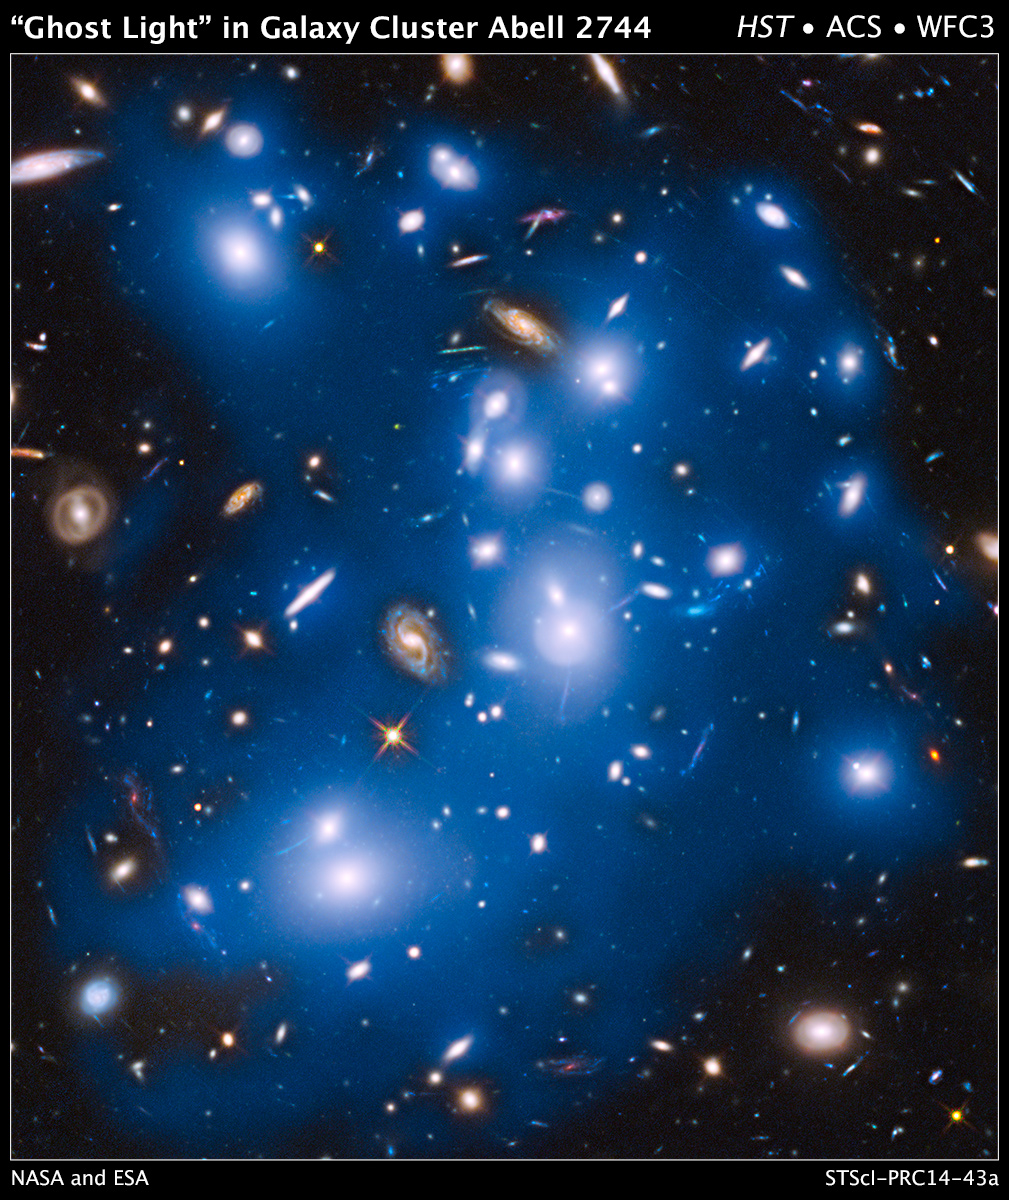 The massive galaxy cluster Abell 2744 takes on a ghostly look in this view by the Hubble Space Telescope, where the total starlight from the cluster has been artificially colored blue. This reveals that not all the starlight is contained within the galaxies, which appear as bright blue-white blobs in the image. A fraction of the starlight is dispersed throughout the cluster, as seen in the darker blue regions. The source of this so-called 'intracluster light', were rogue stars which were ejected from their host galaxies when the latter were destroyed in past cataclysmic collisions within the cluster.  NASA, ESA, M. Montes (IAC), and J. Lotz, M. Mountain, A. Koekemoer, and the HFF Team (STScI)